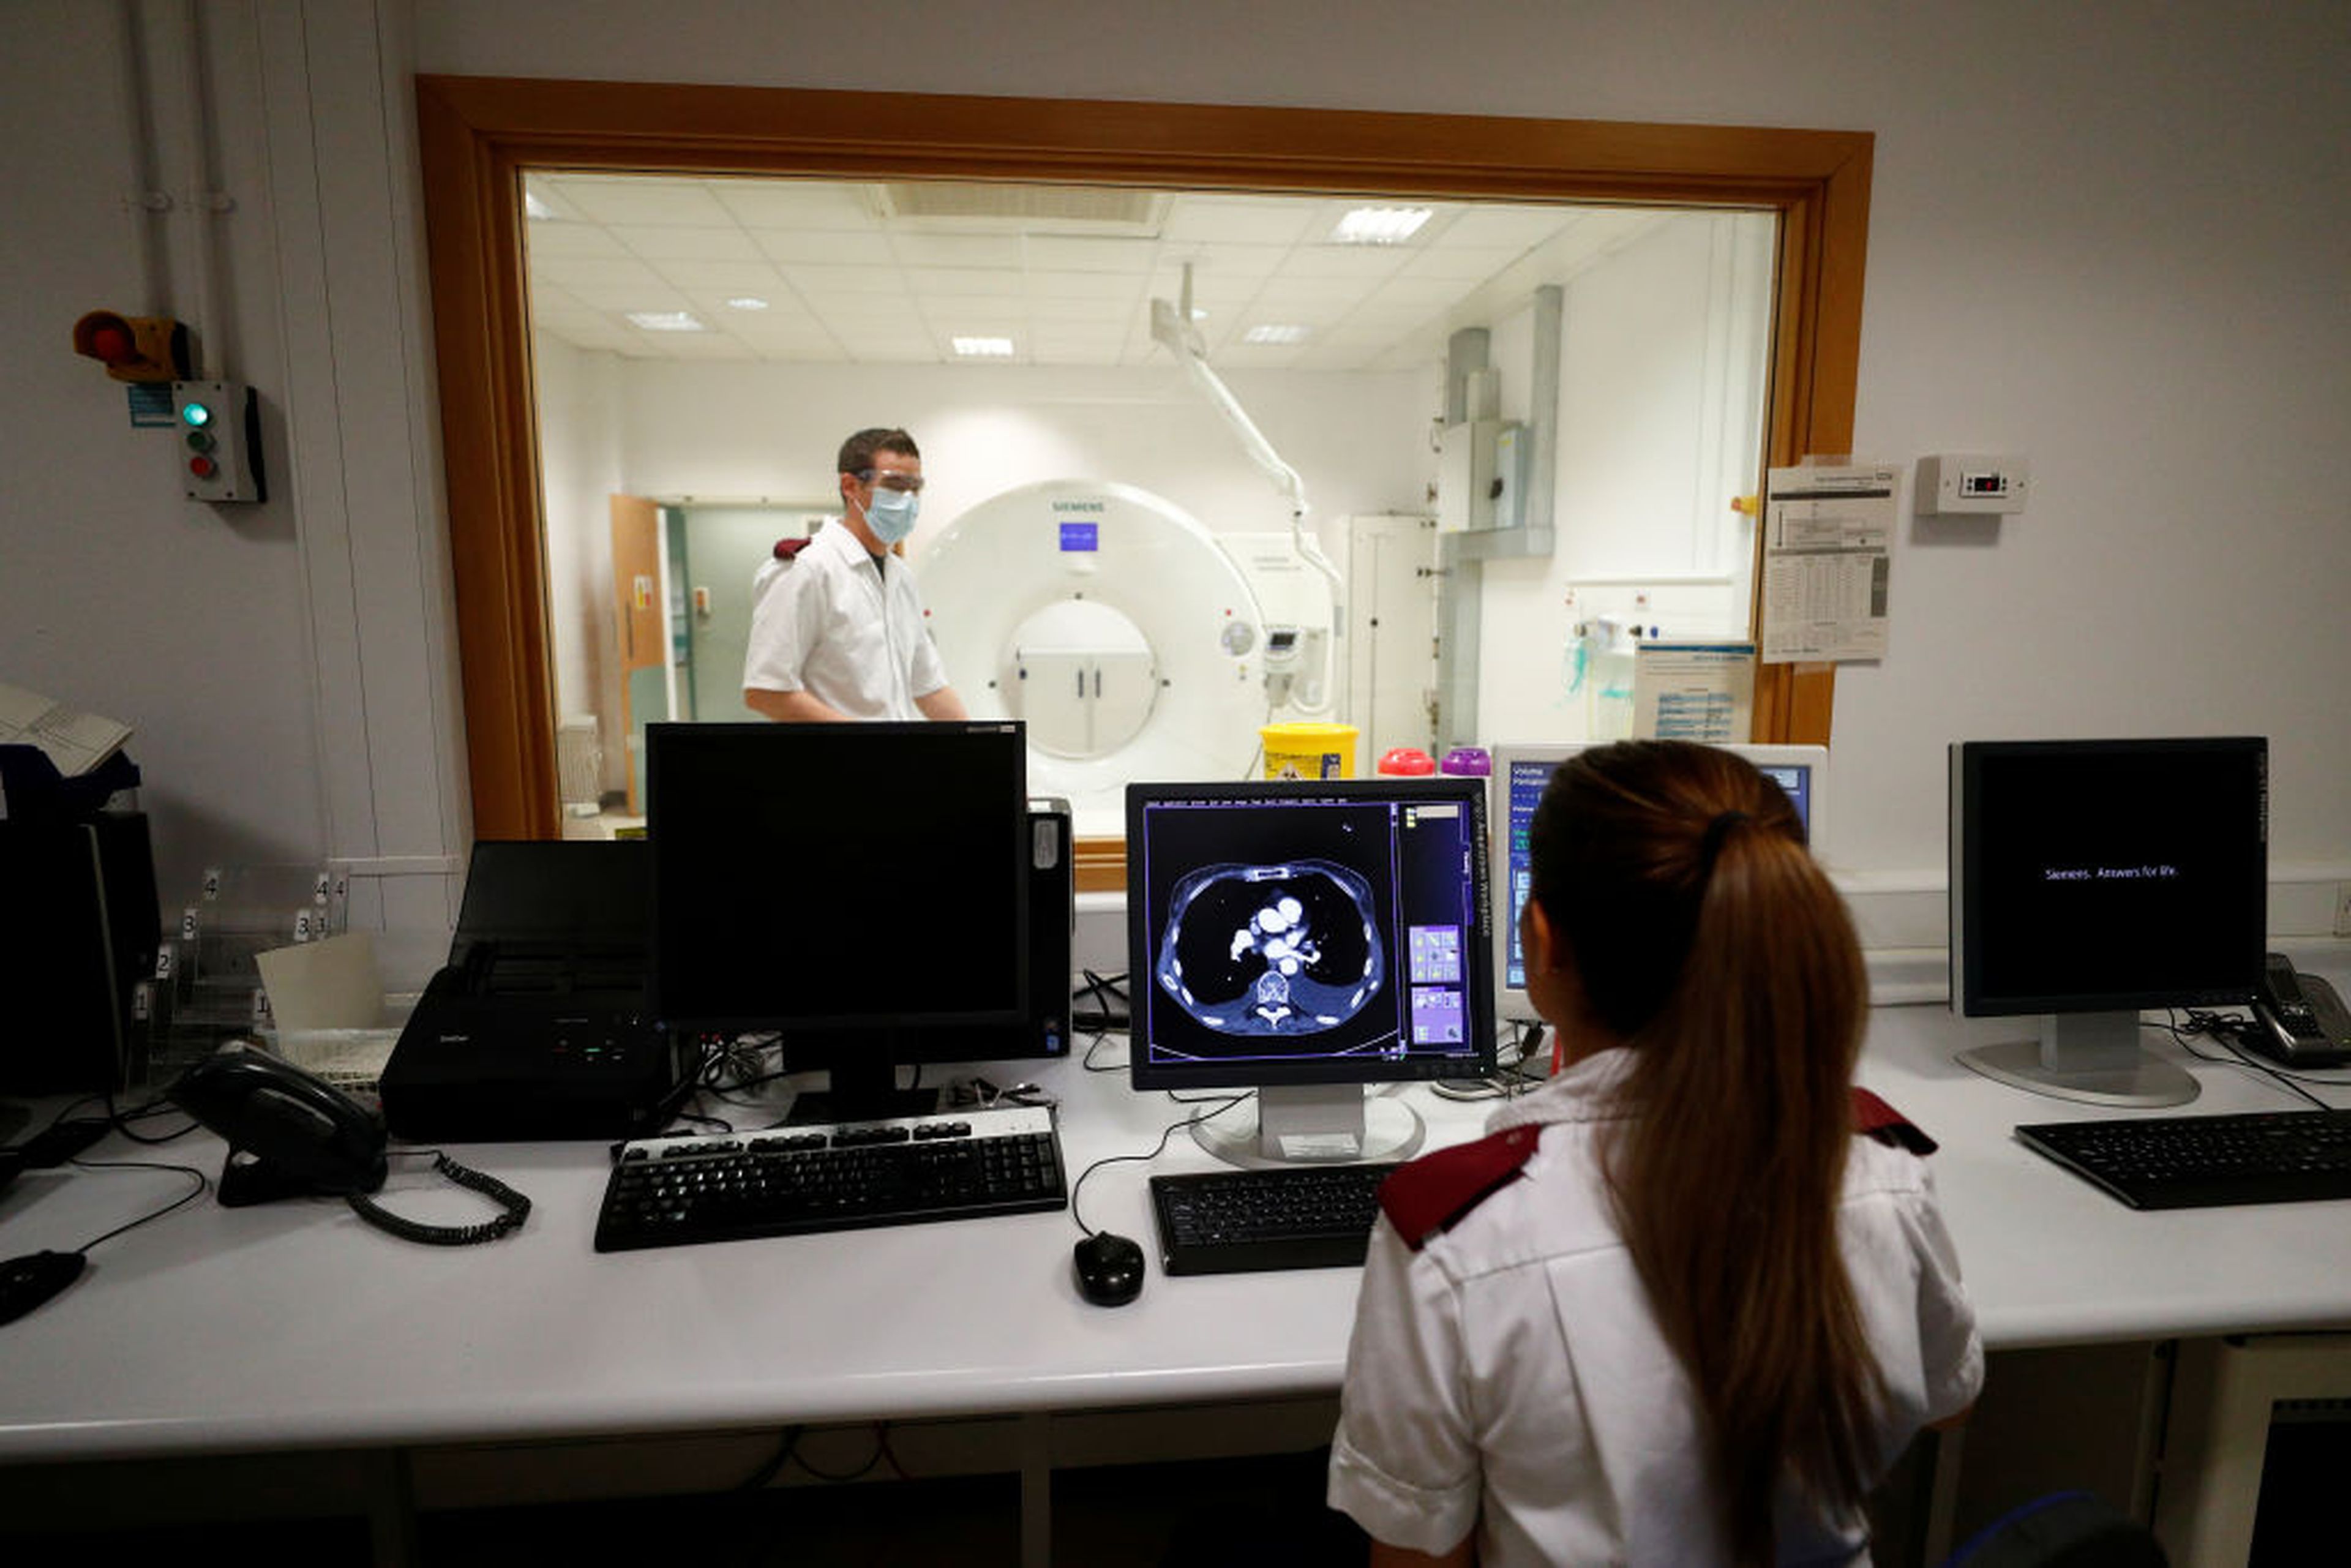 Medical staff prepare to receive a patient for a CT scan at The Royal Blackburn Teaching Hospital in East Lancashire, during the COVID-19 epidemic on May 14, 2020, in Blackburn, England. (Photo by Hannah McKay/Getty Images via Pool)